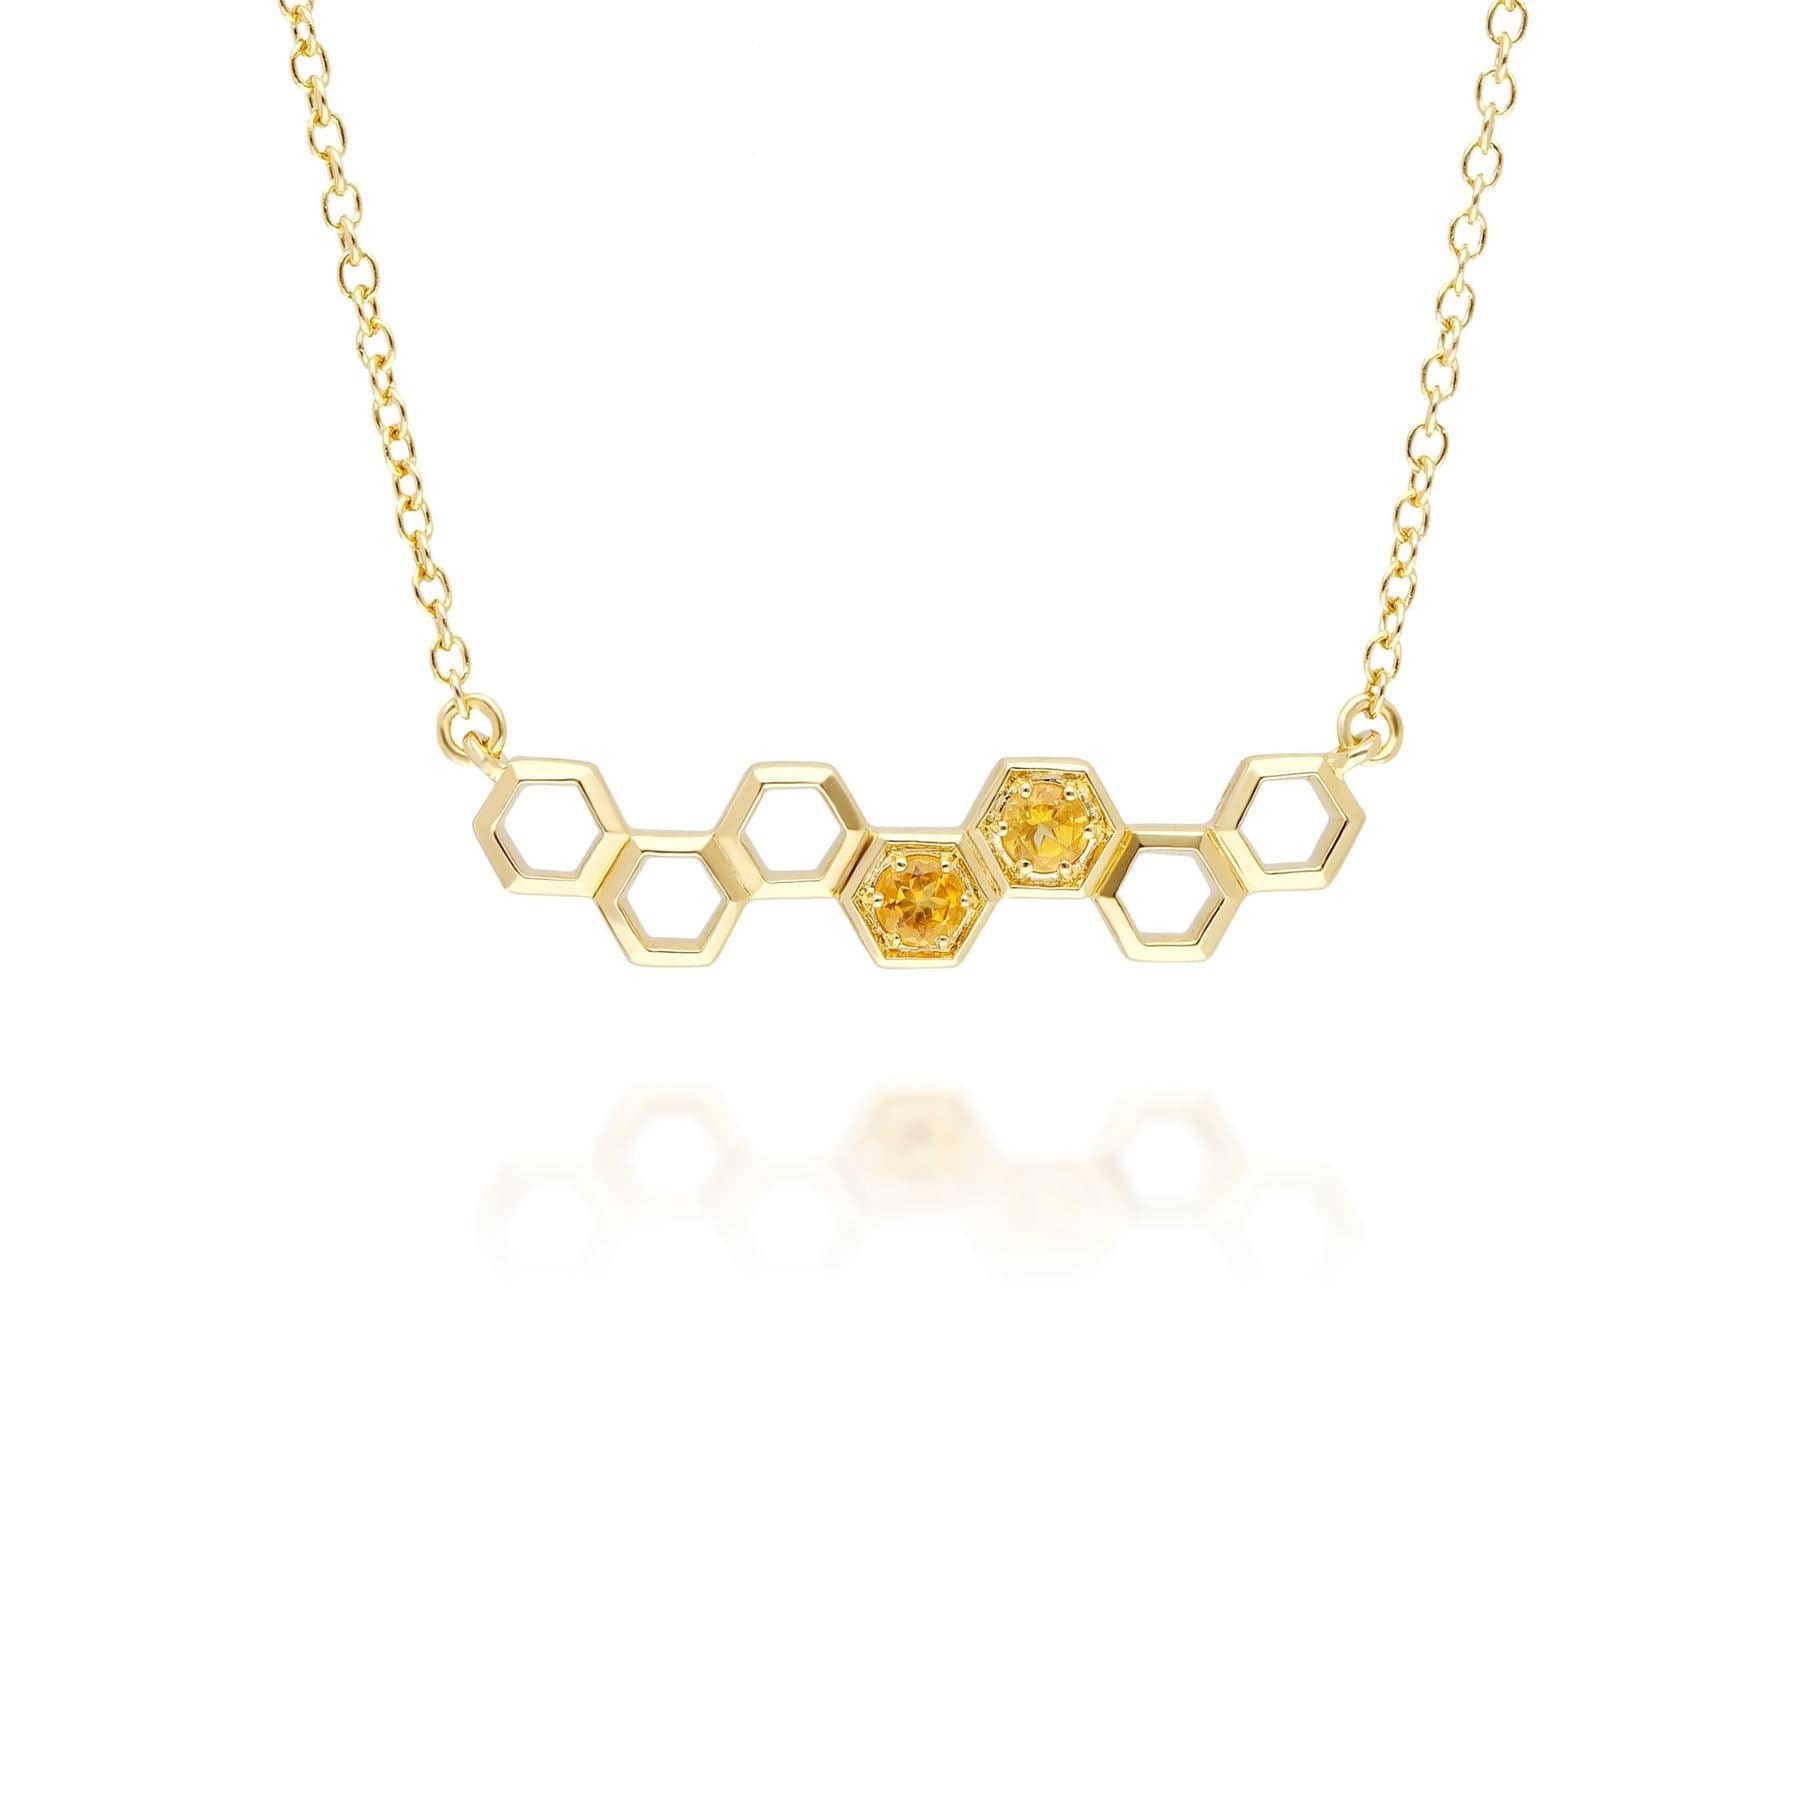 135N0361019 Honeycomb Inspired Citrine Link Necklace in 9ct Yellow Gold 1